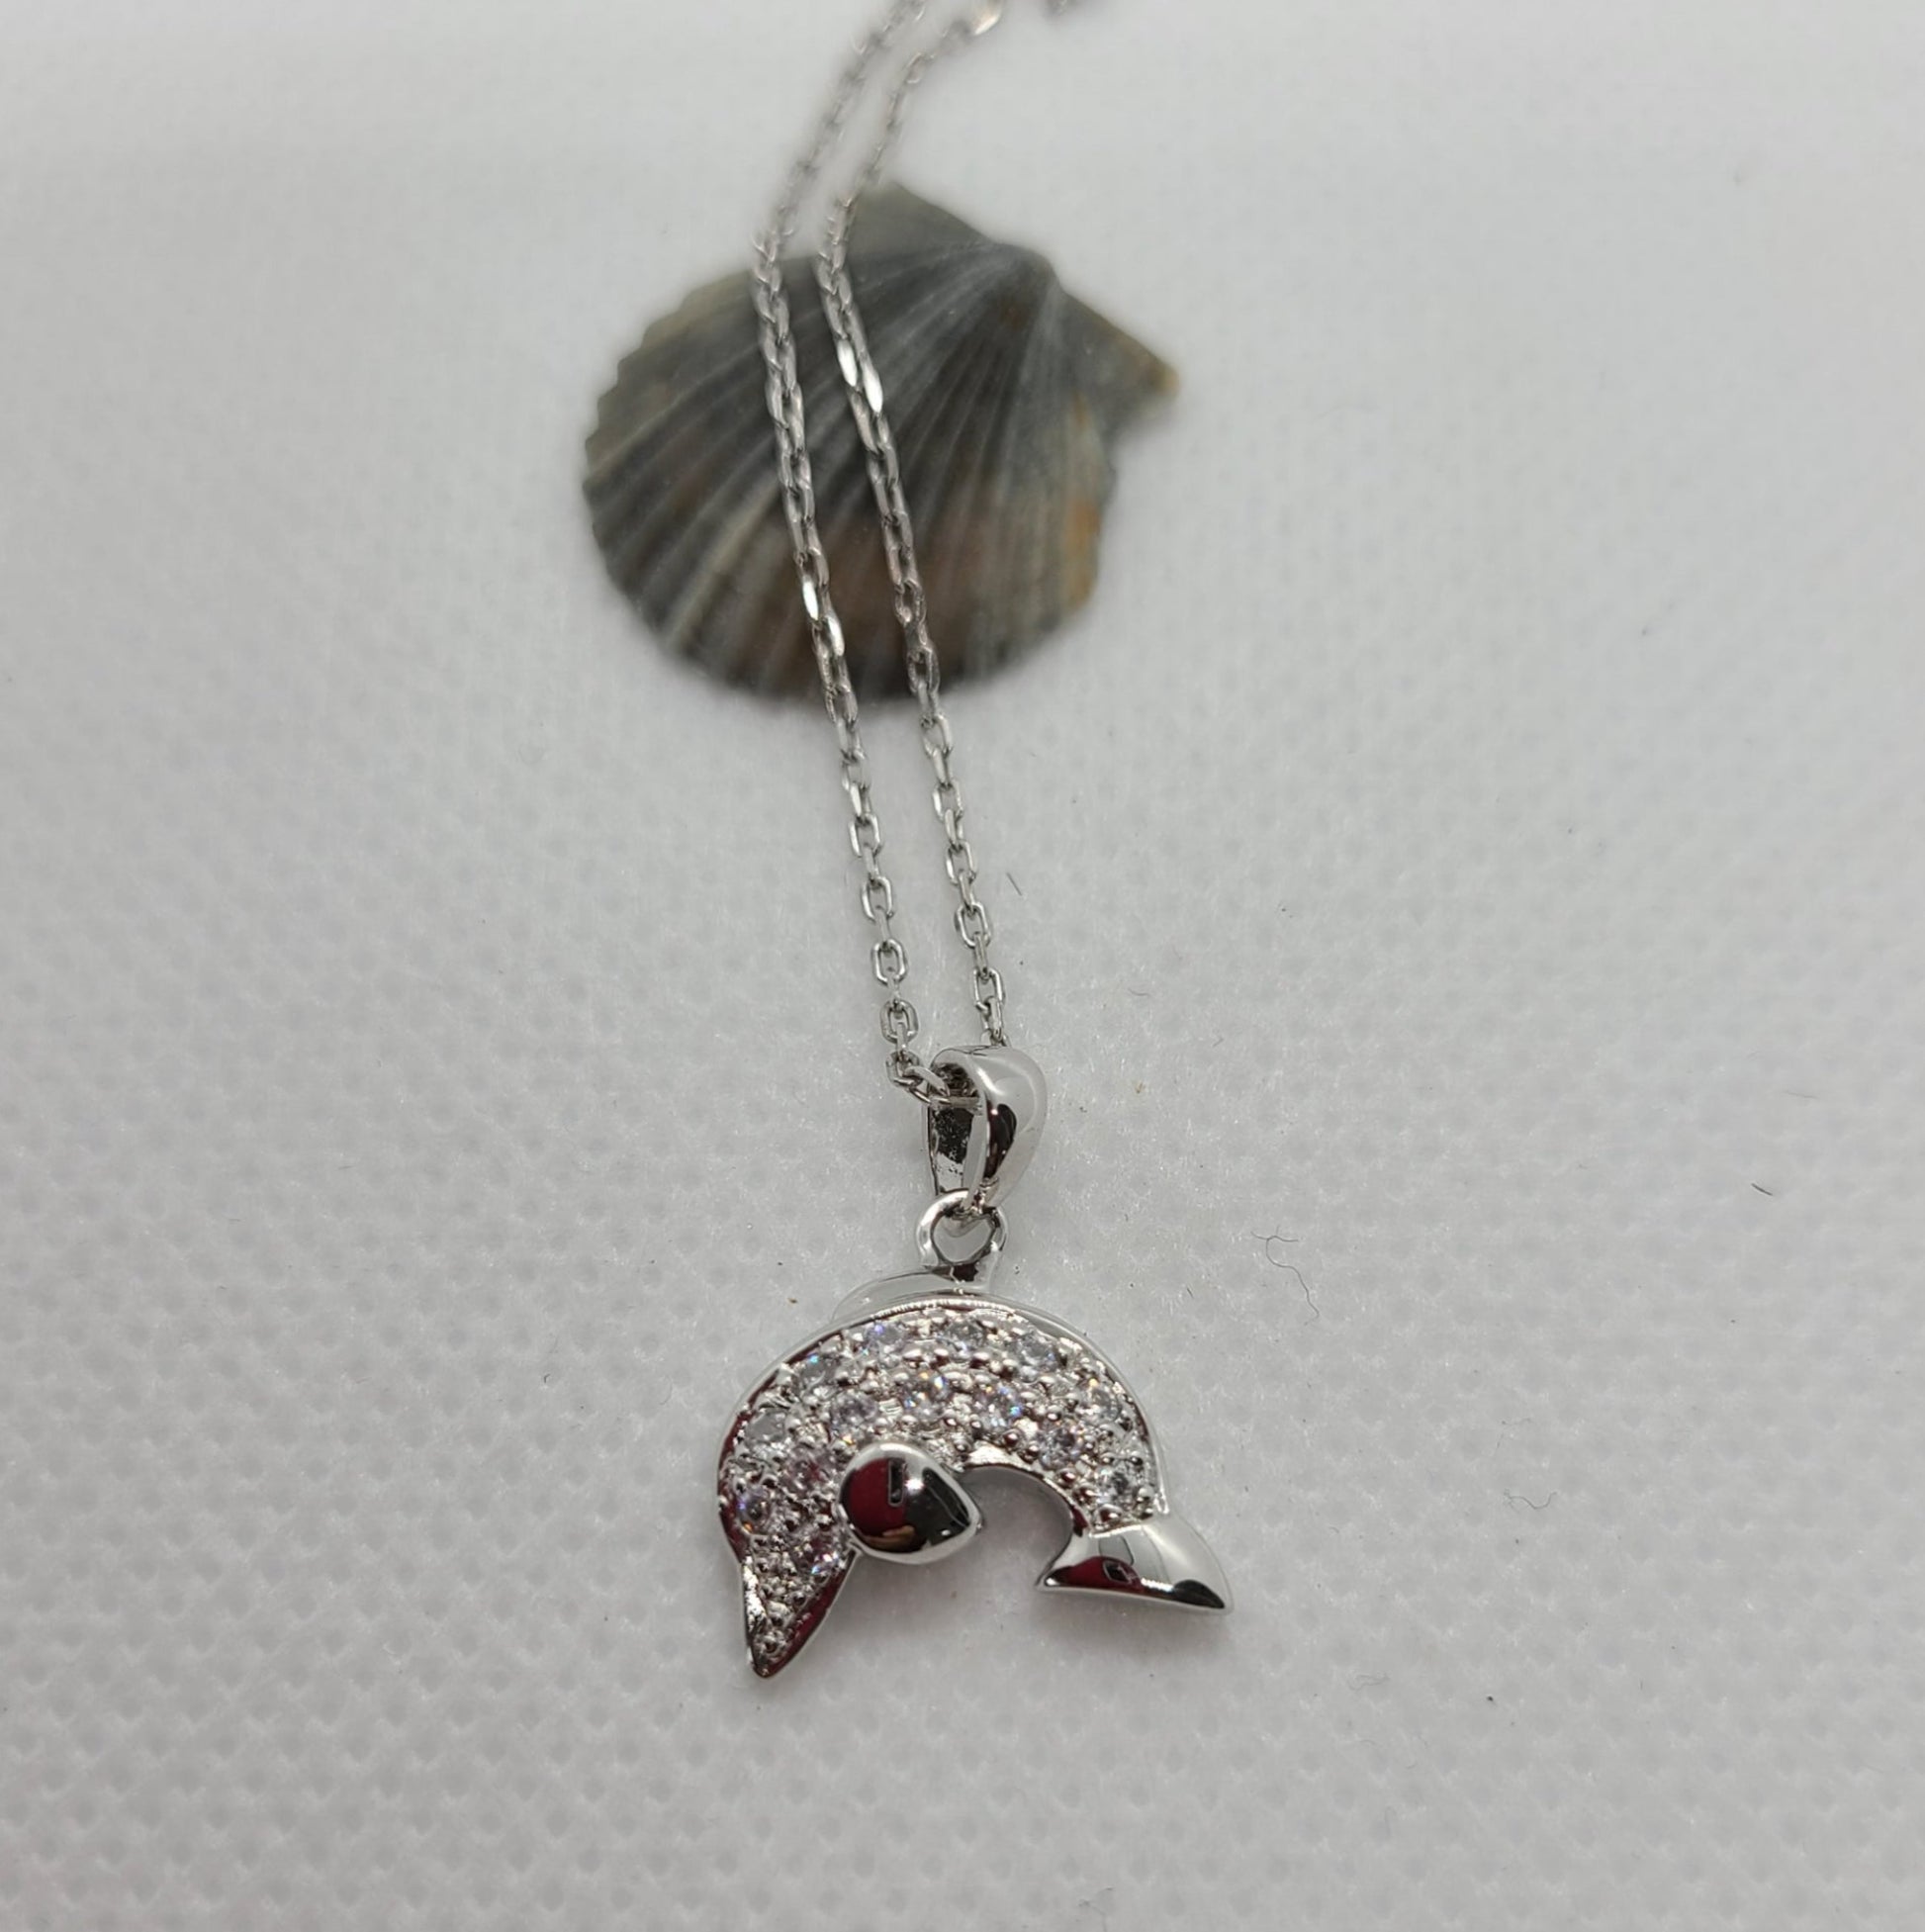 Curved silver dolphin. Body is covered in CZ's. Nisha Design  Jumping Dolphin Necklace.  Sterling Silver and CZs. Rhodium Plated. Beautiful design.  Chain is Sterling Silver and is Rhodium Plated. Never needs polishing.  Chain is 16 inches long.